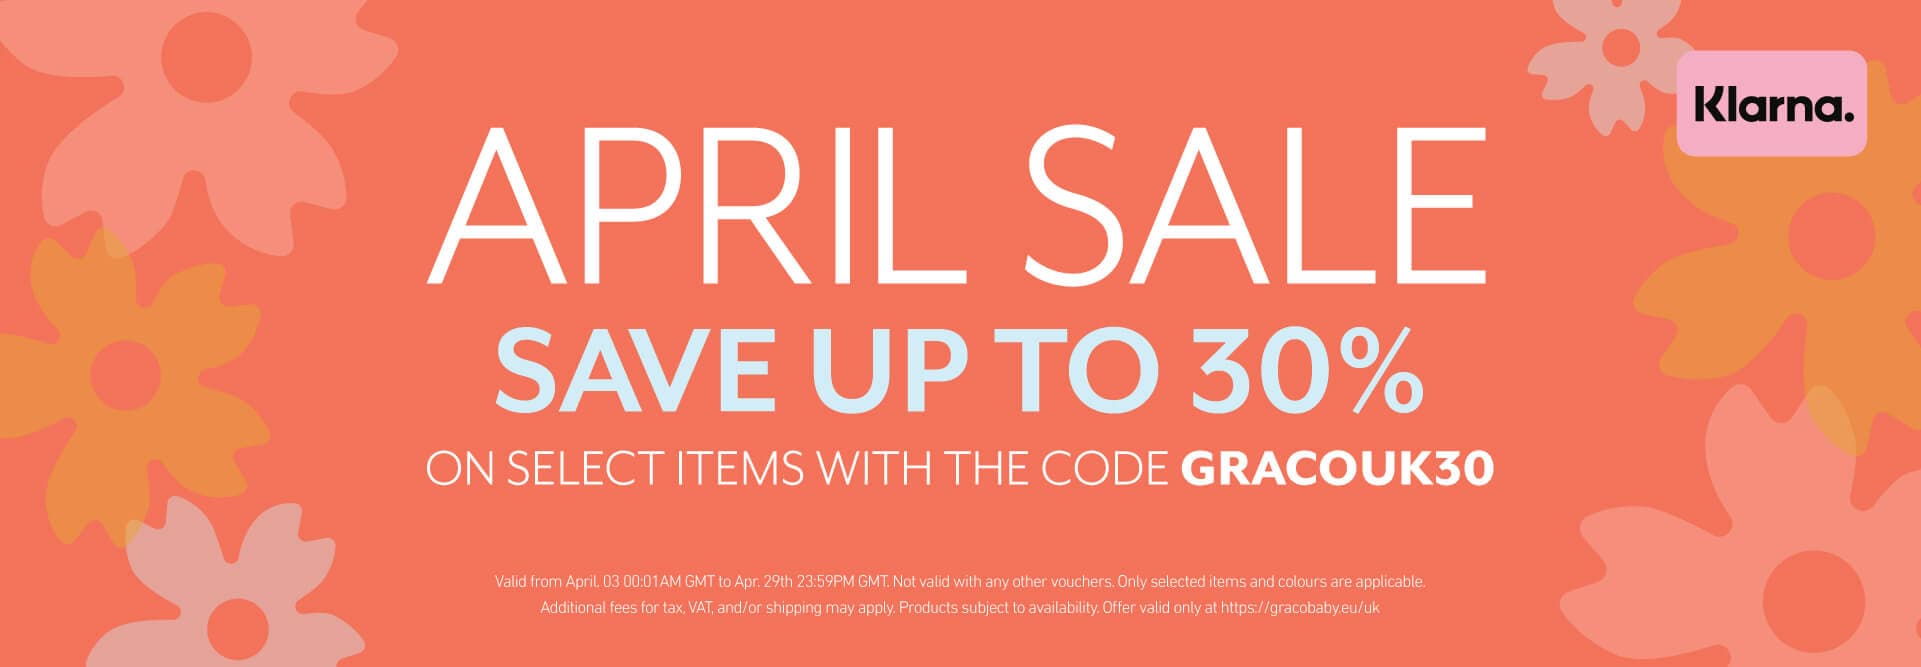 Orange banner with flower graphics and text reading "April Sale, Save up to 30%